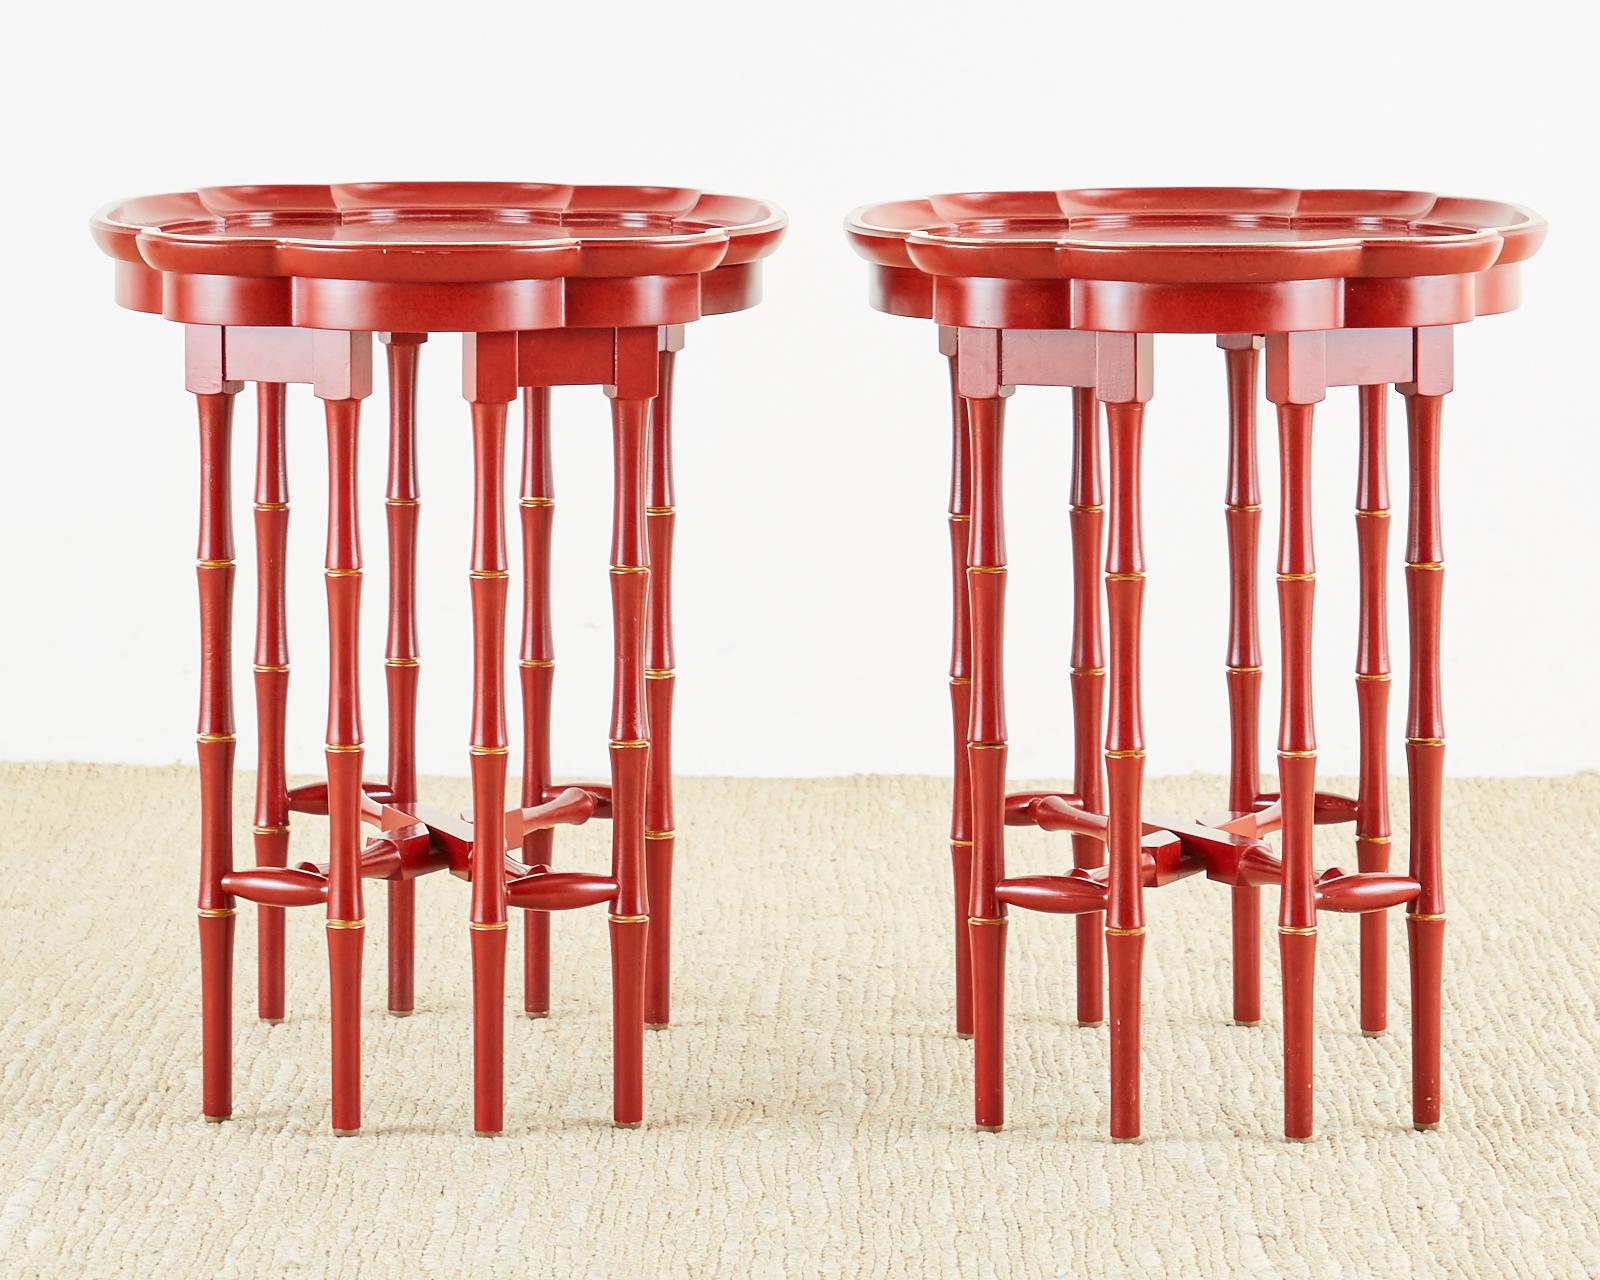 Red lacquered pair of tray tables made in the English chinoiserie taste featuring faux bamboo folding bases. The tray tops are decorated with idyllic Asian motif scenes and have a galleried edge. The tables have a parcel-gilt finish on tops and